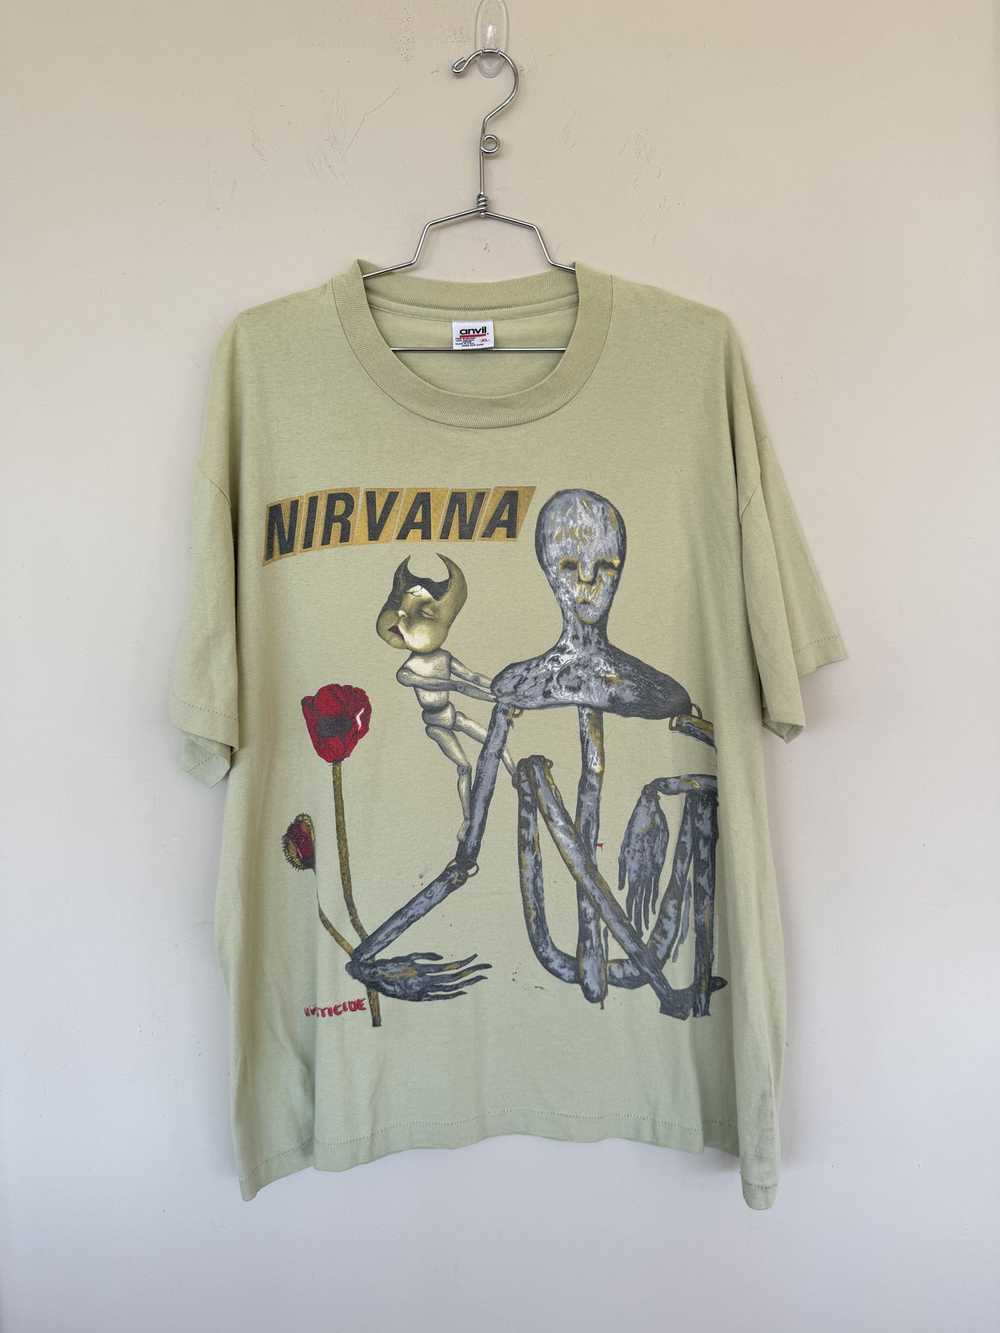 Vintage Nirvana Insecticide Tee 1993 - image 1